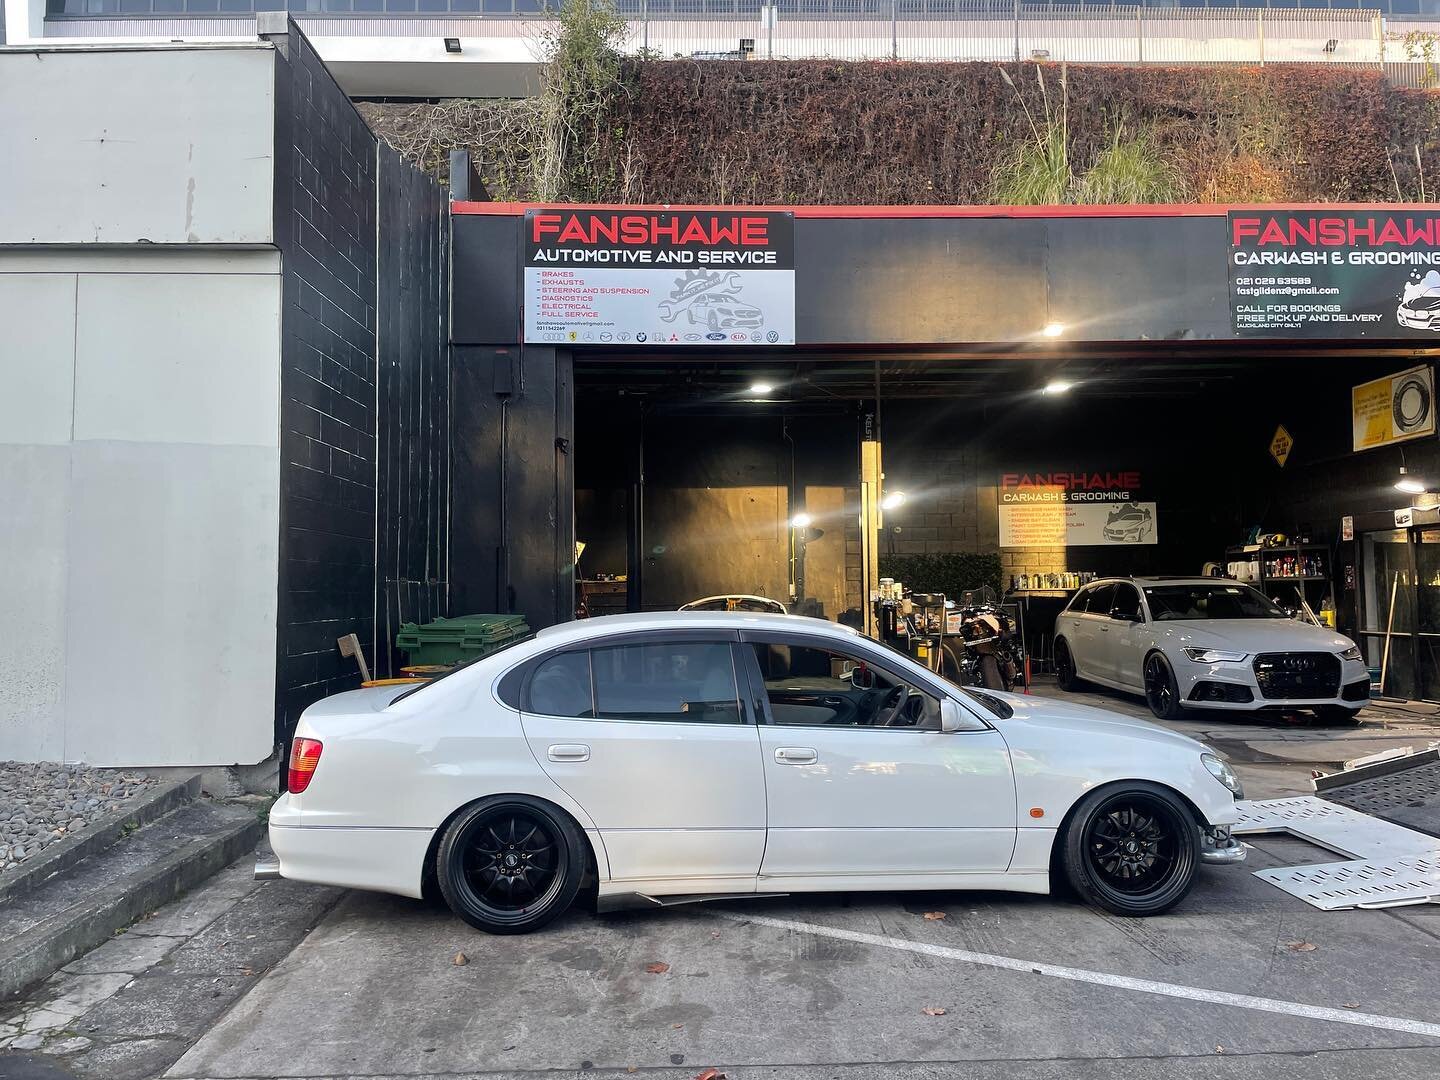 Blood sweat and tears. Lots of long nights and weekend days put into this Aristo. Started this project last year with the owner being a very close friend of mine. The car was stock when purchased. Came back from JT Performance making a humble 385KW w